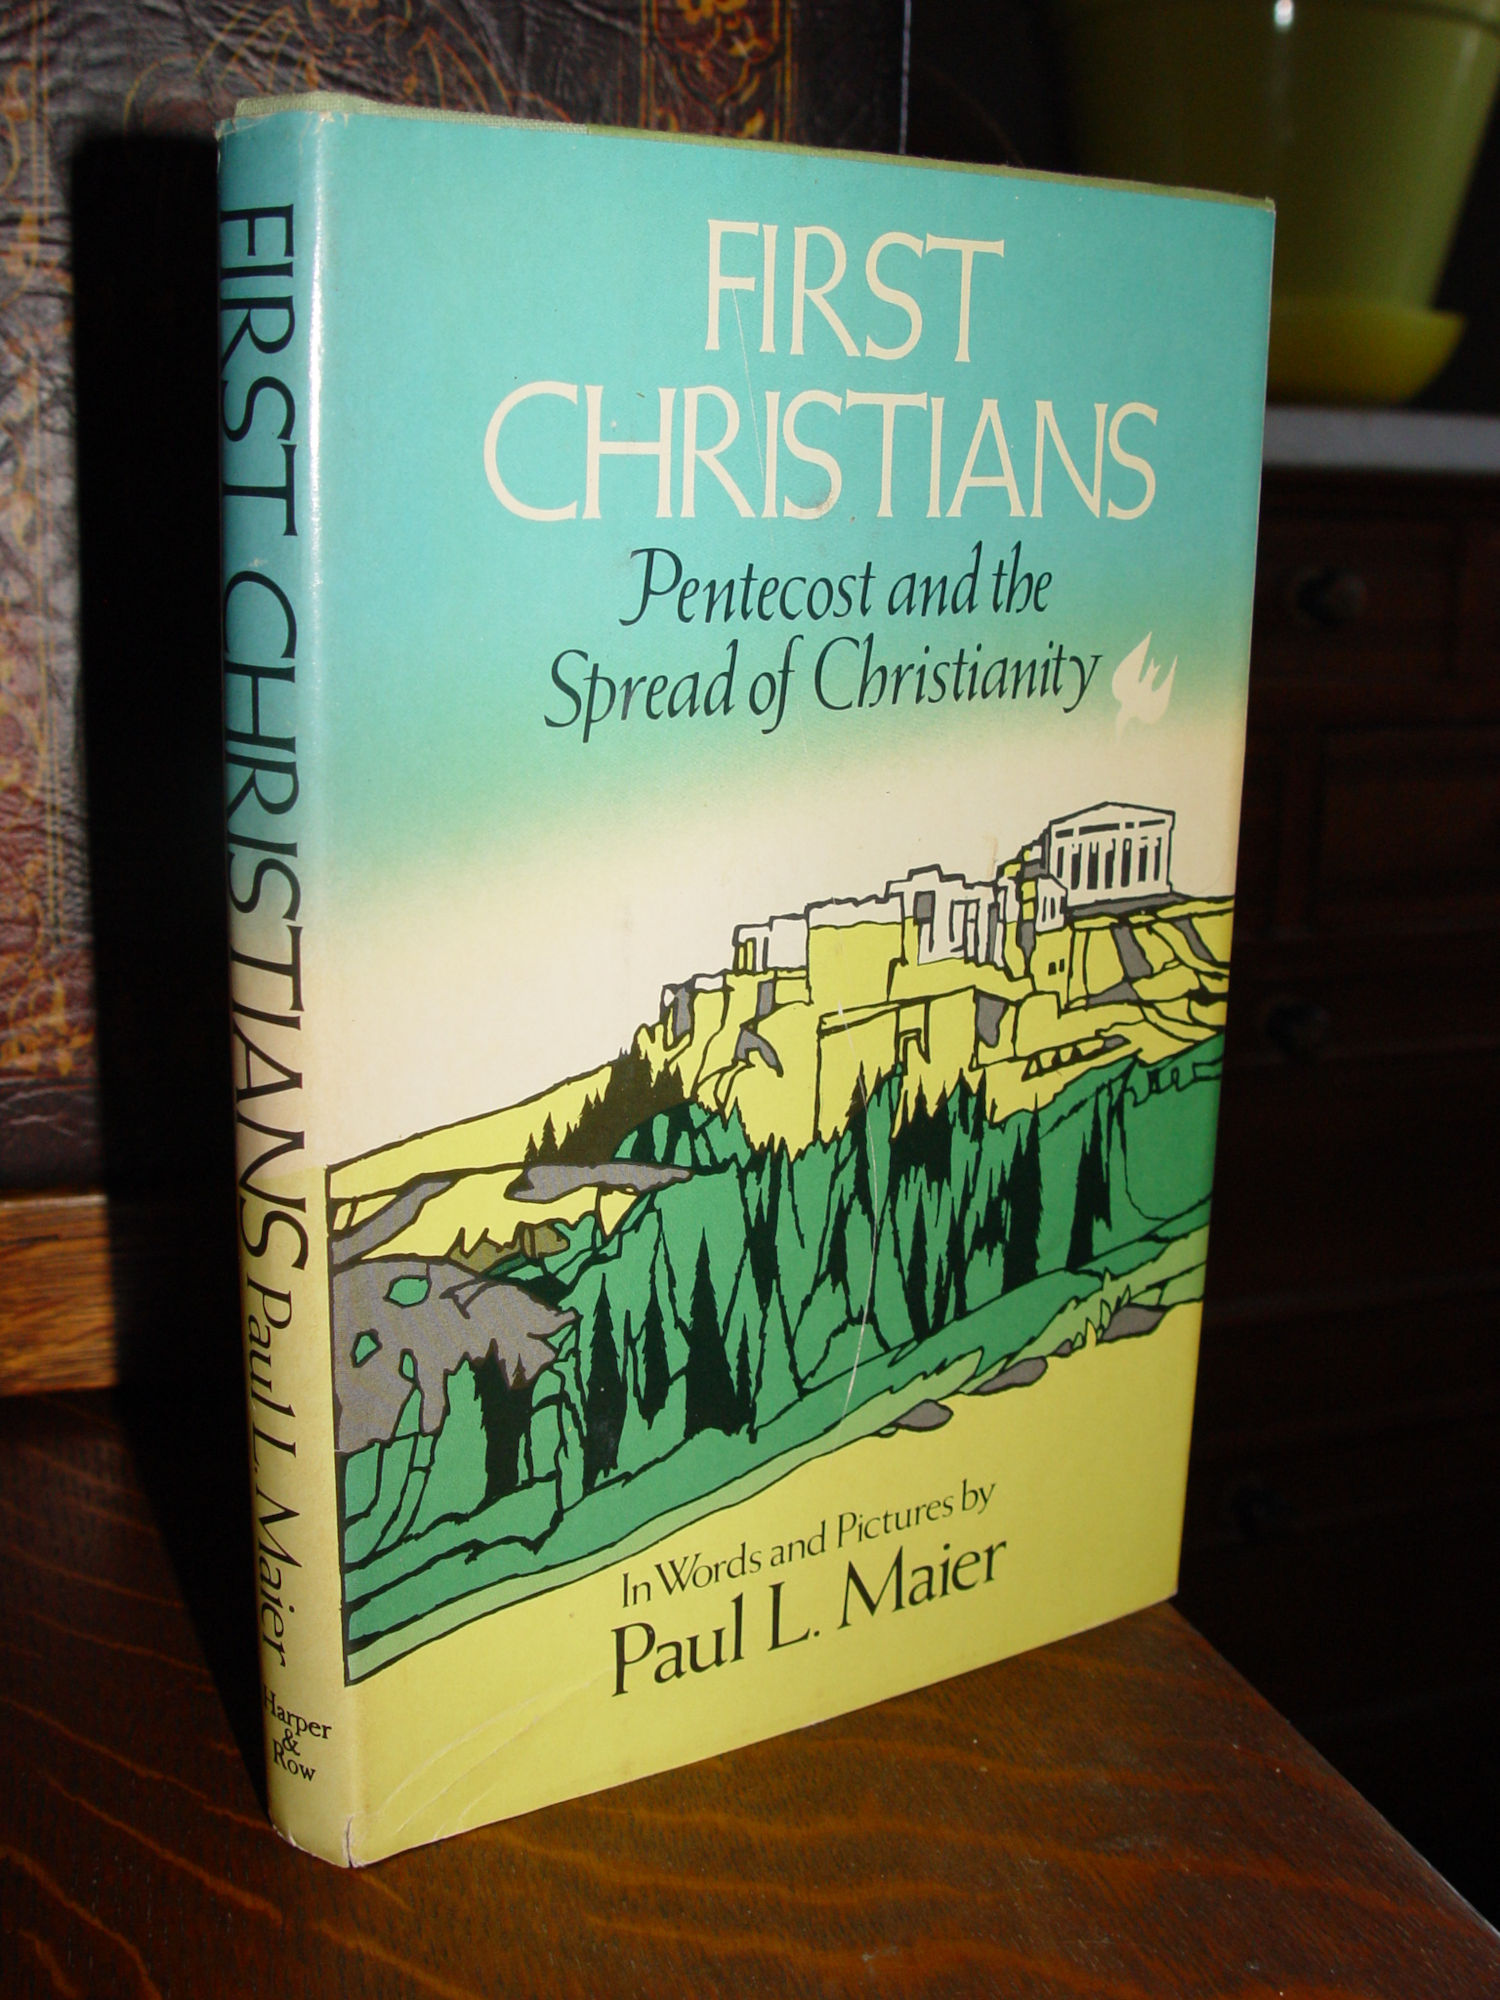 First Christians:
                        Pentecost and the spread of Christianity 1976 by
                        Paul L. Maier